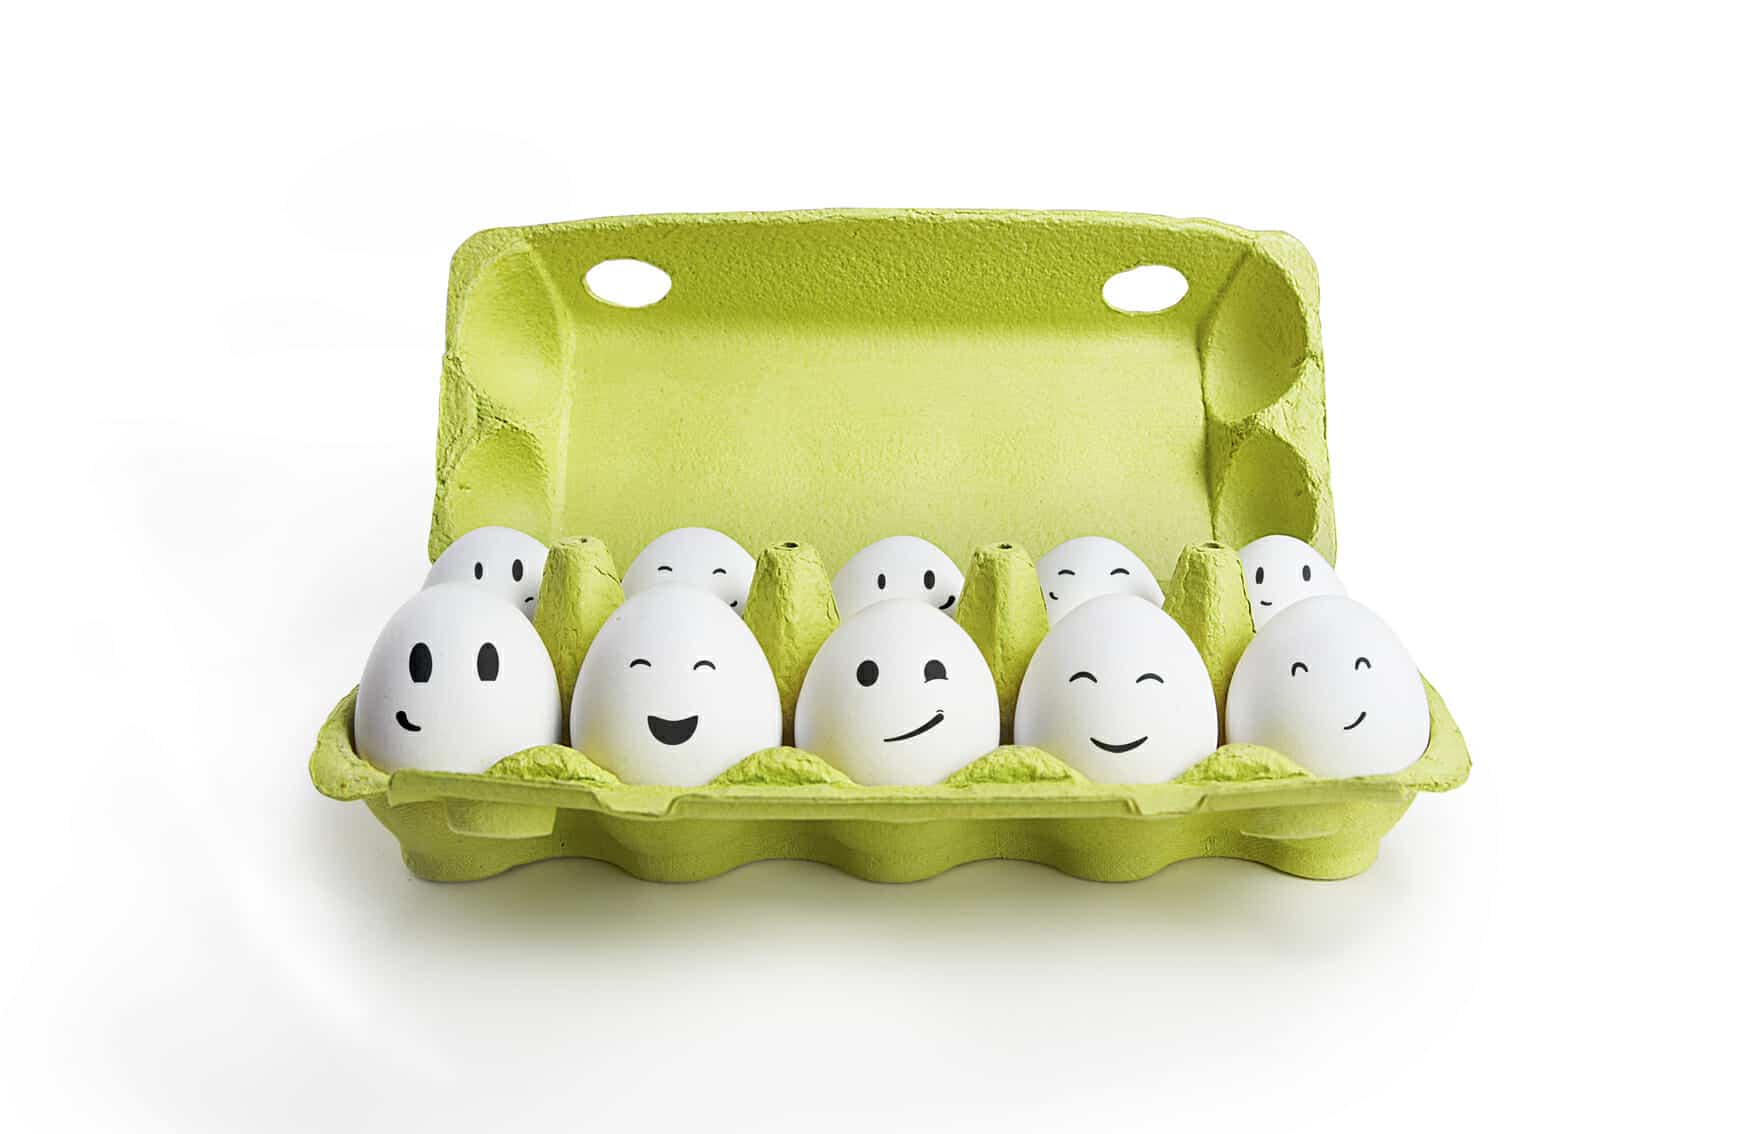 Eggs with smiling faces